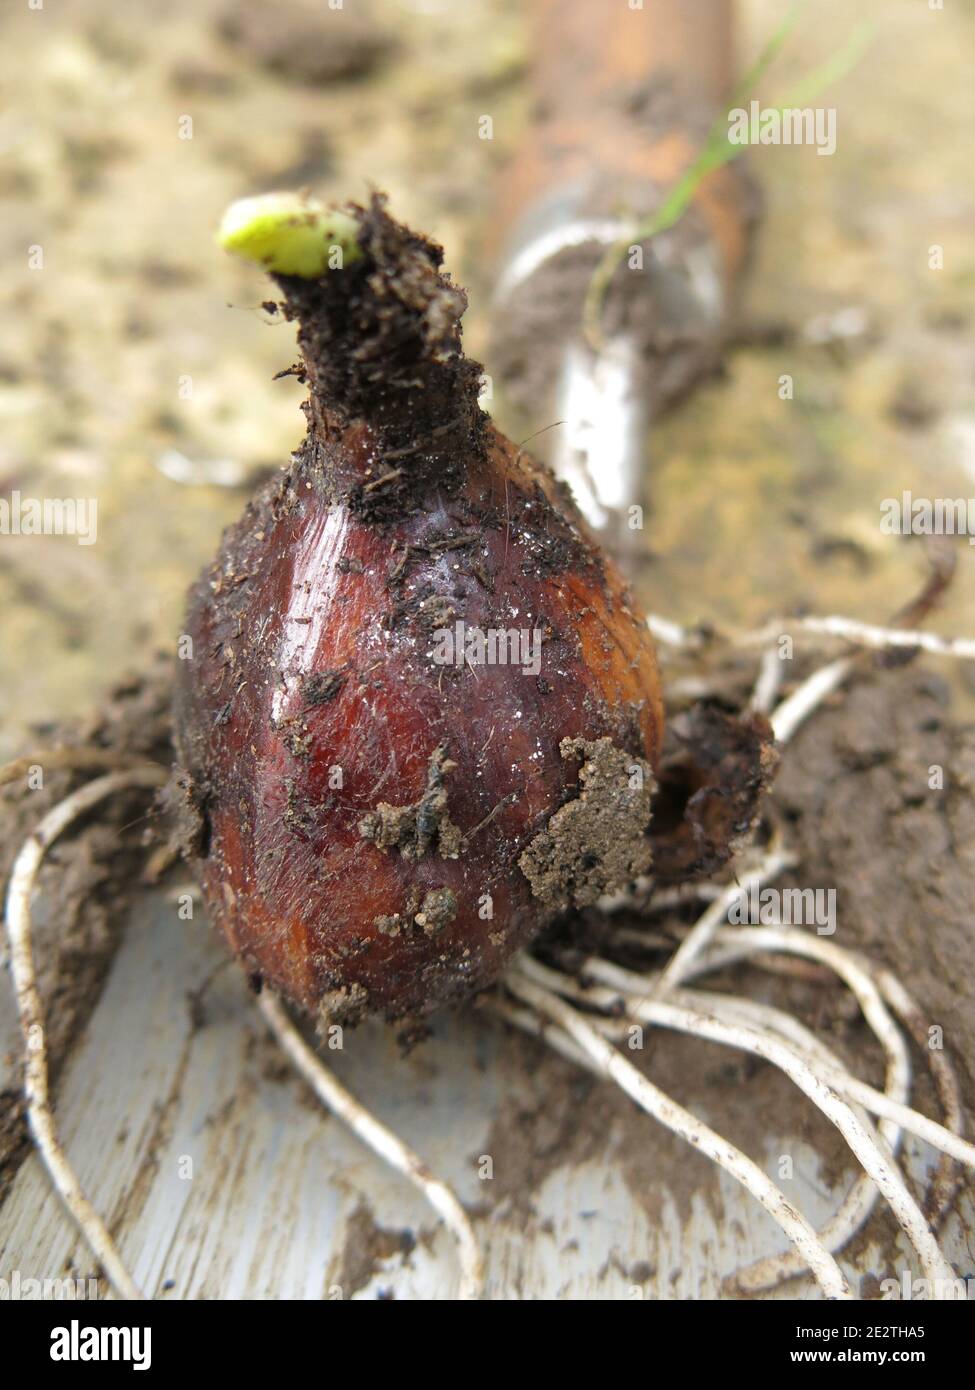 Beeds stock photo. Image of root, cook, group, heap, bulbous - 44477972